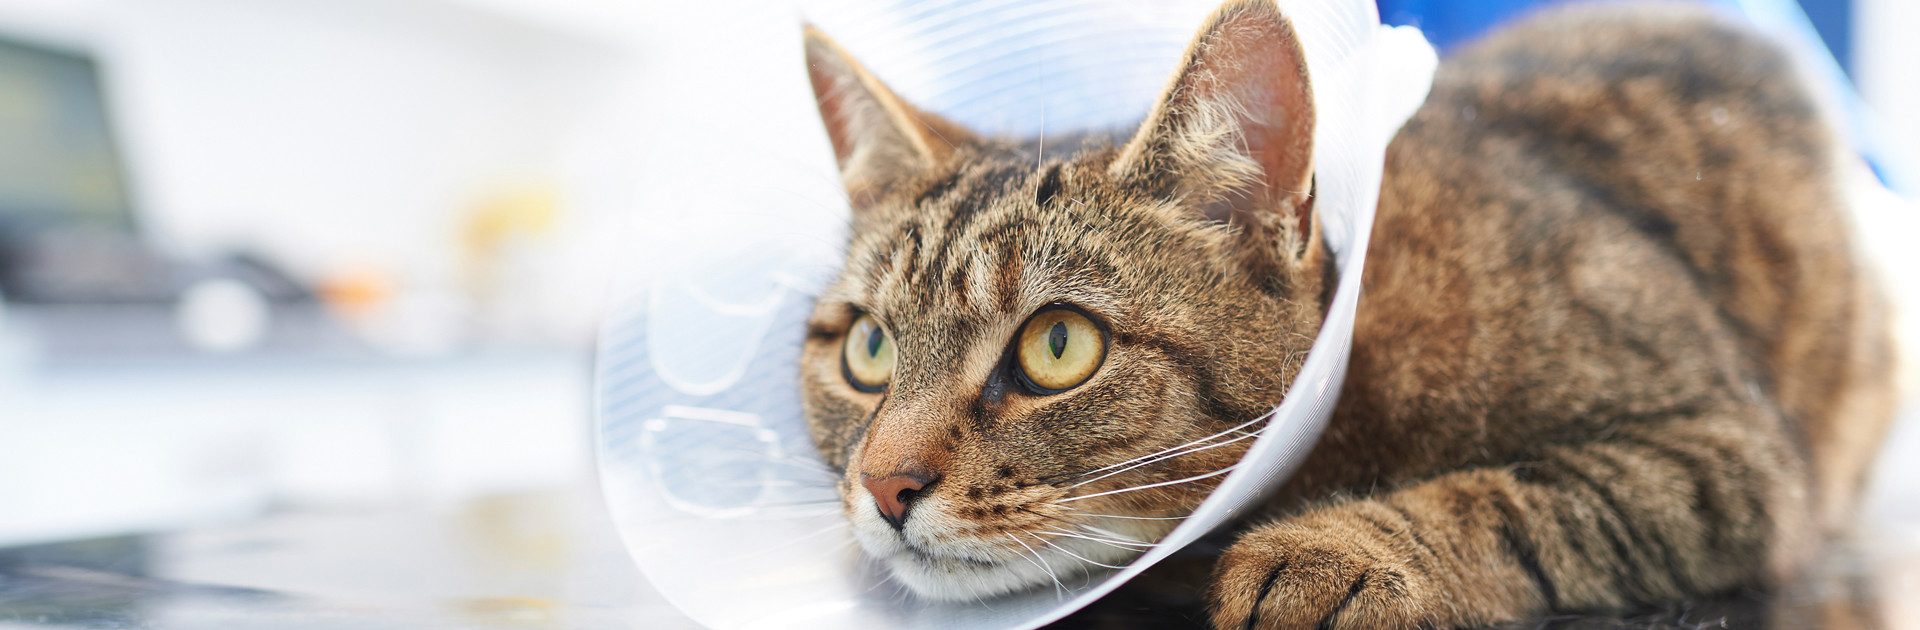 Tabby cat with medical cone on